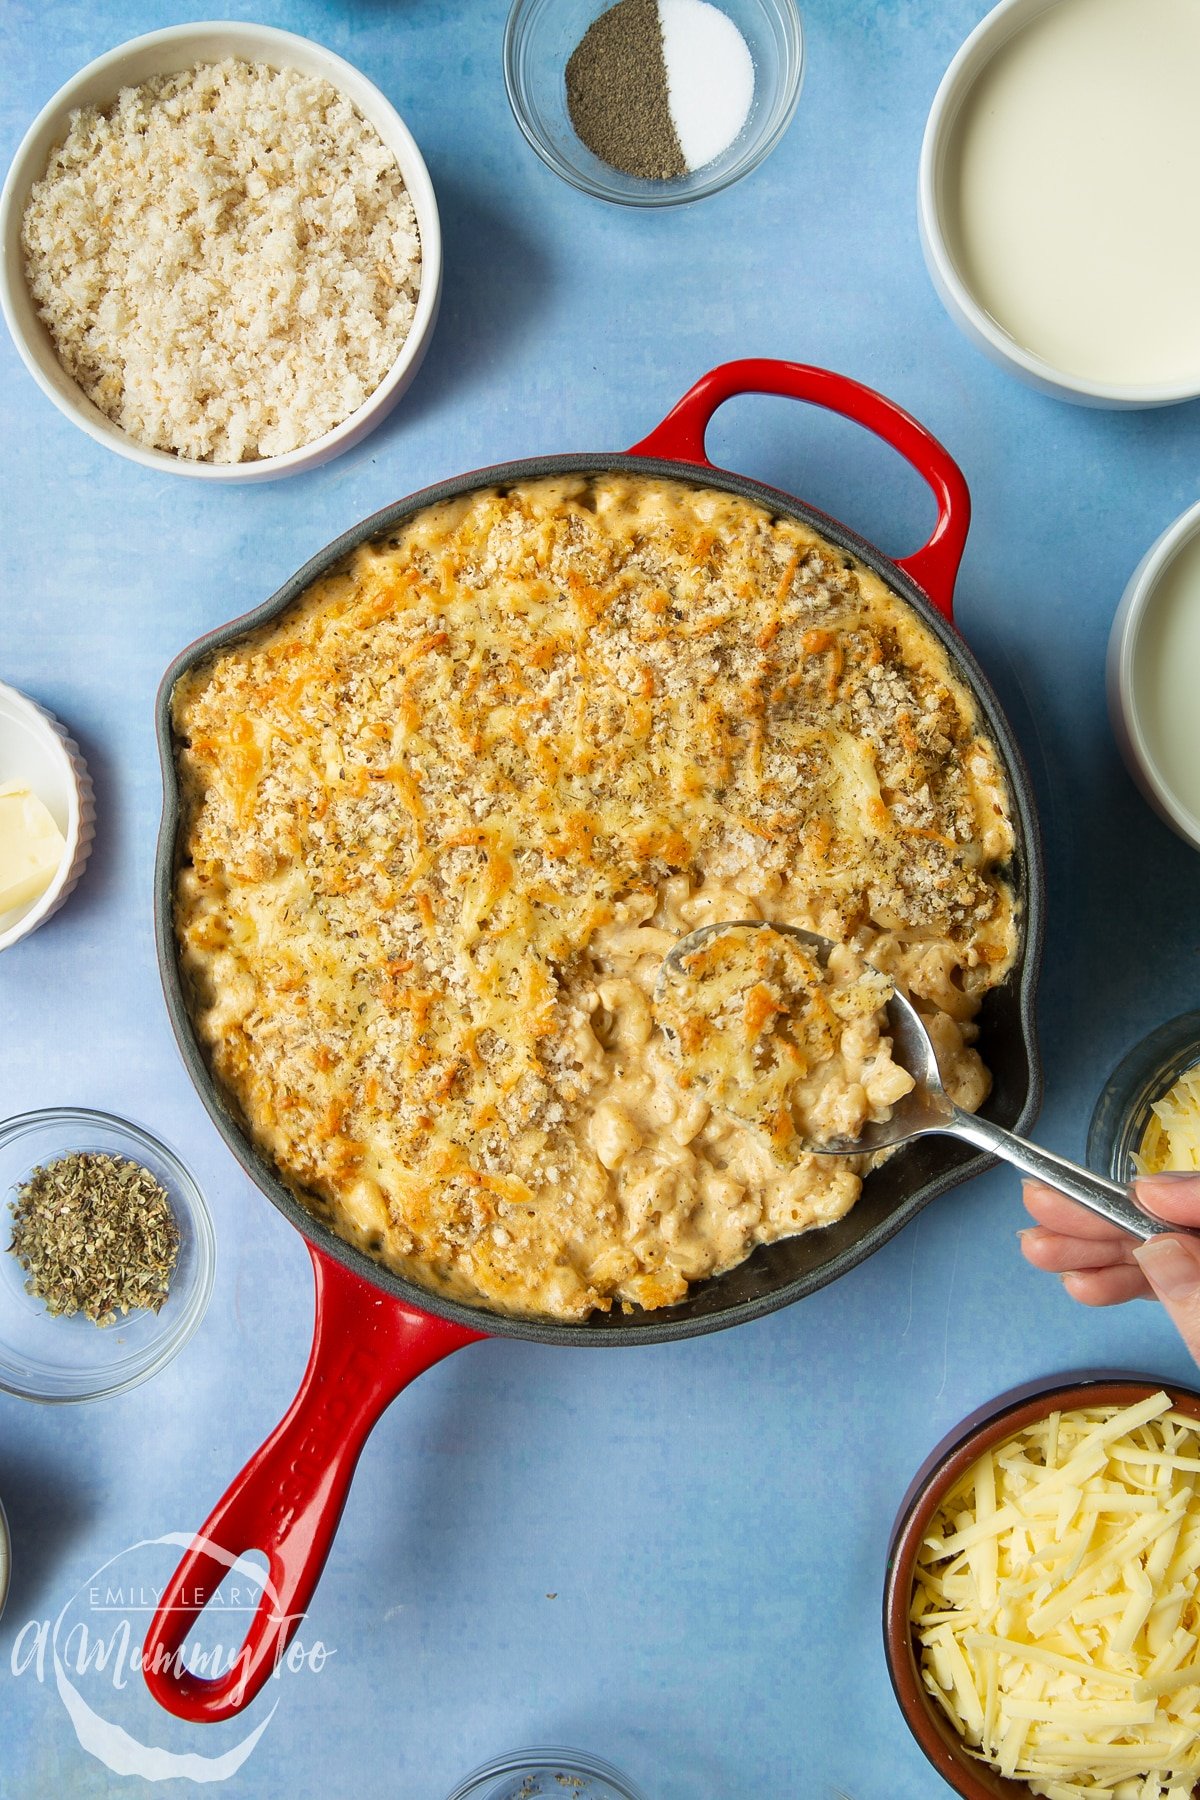 Freshly baked garlic and herb mac and cheese in a skillet. A hand holds a large spoon, delving into the skillet.